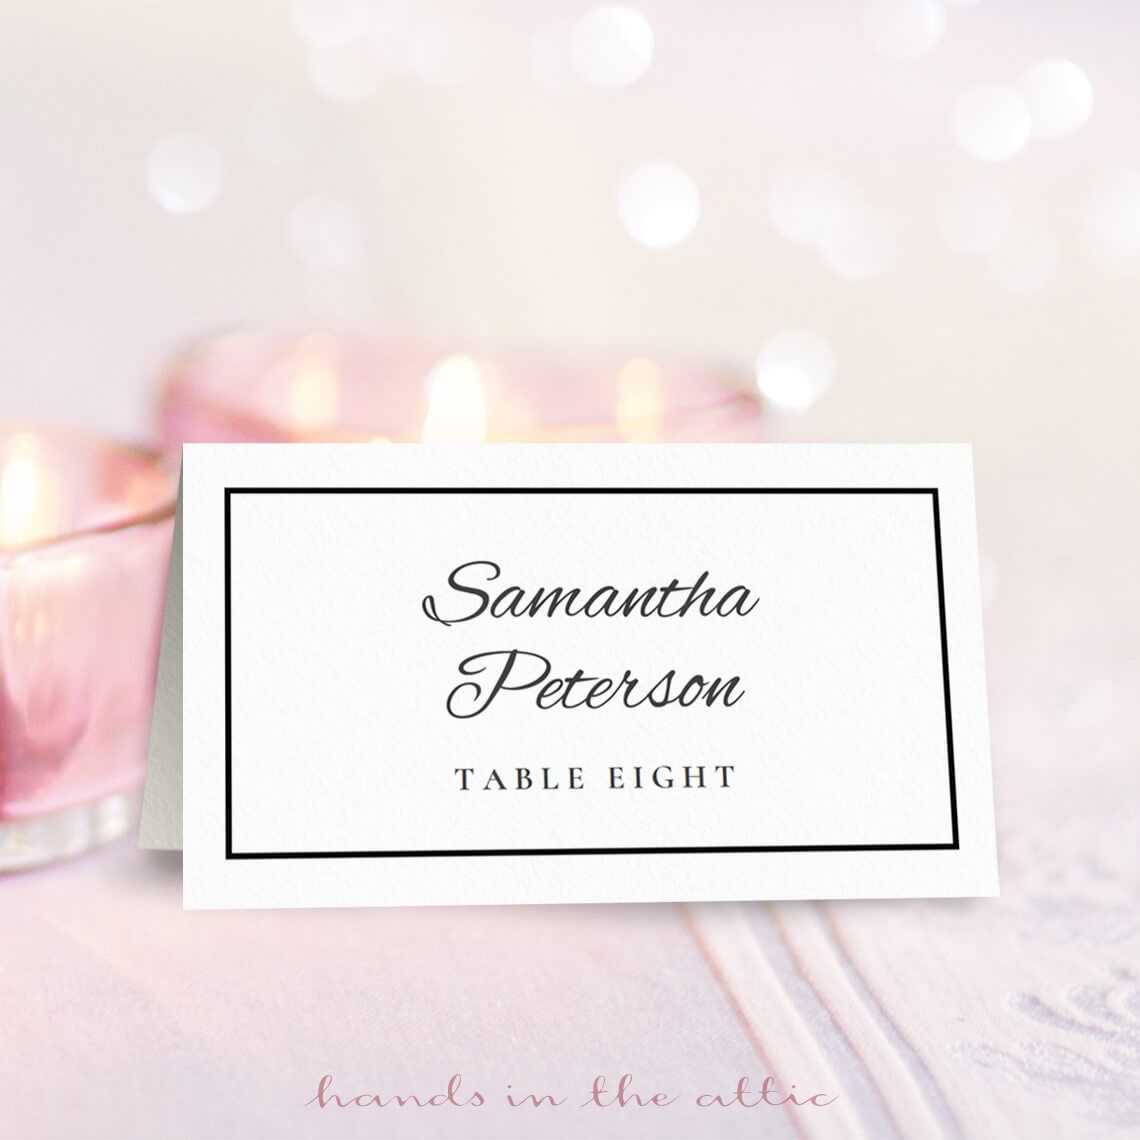 Wedding Place Card Template | Free On Handsintheattic With Regard To Place Card Setting Template